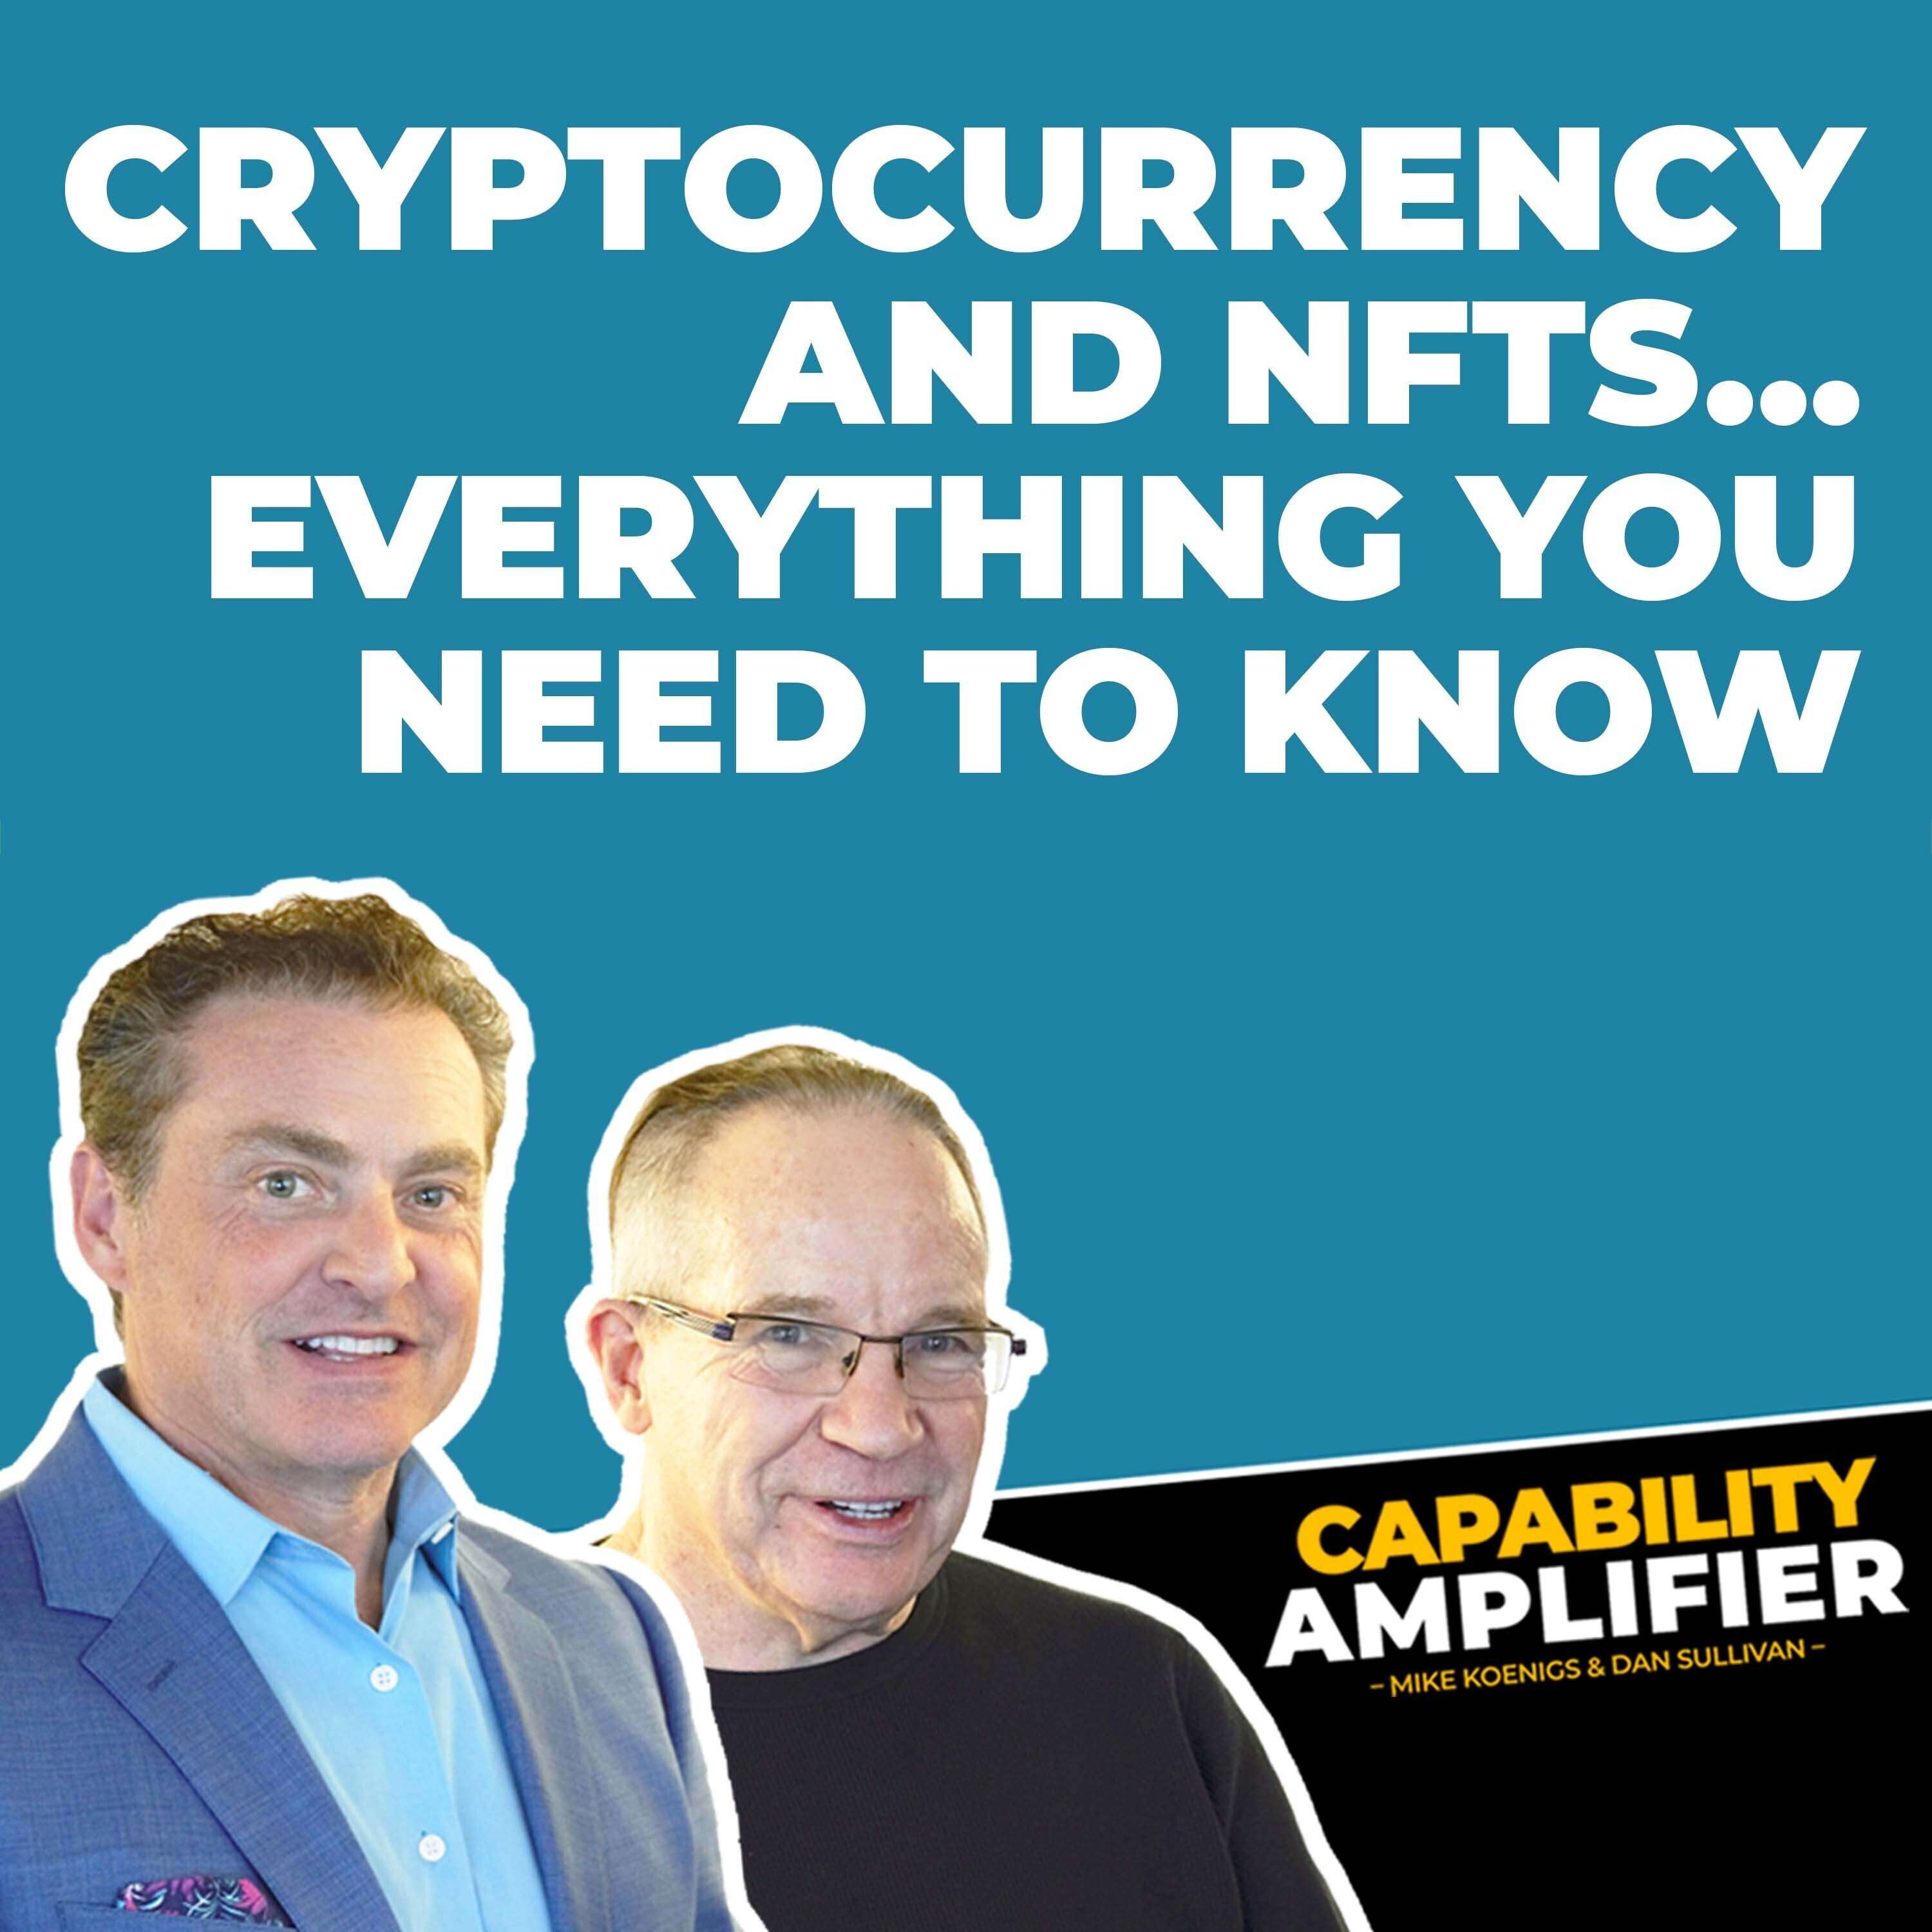 Everything You Need to Know About NFT’s and Cryptocurrency